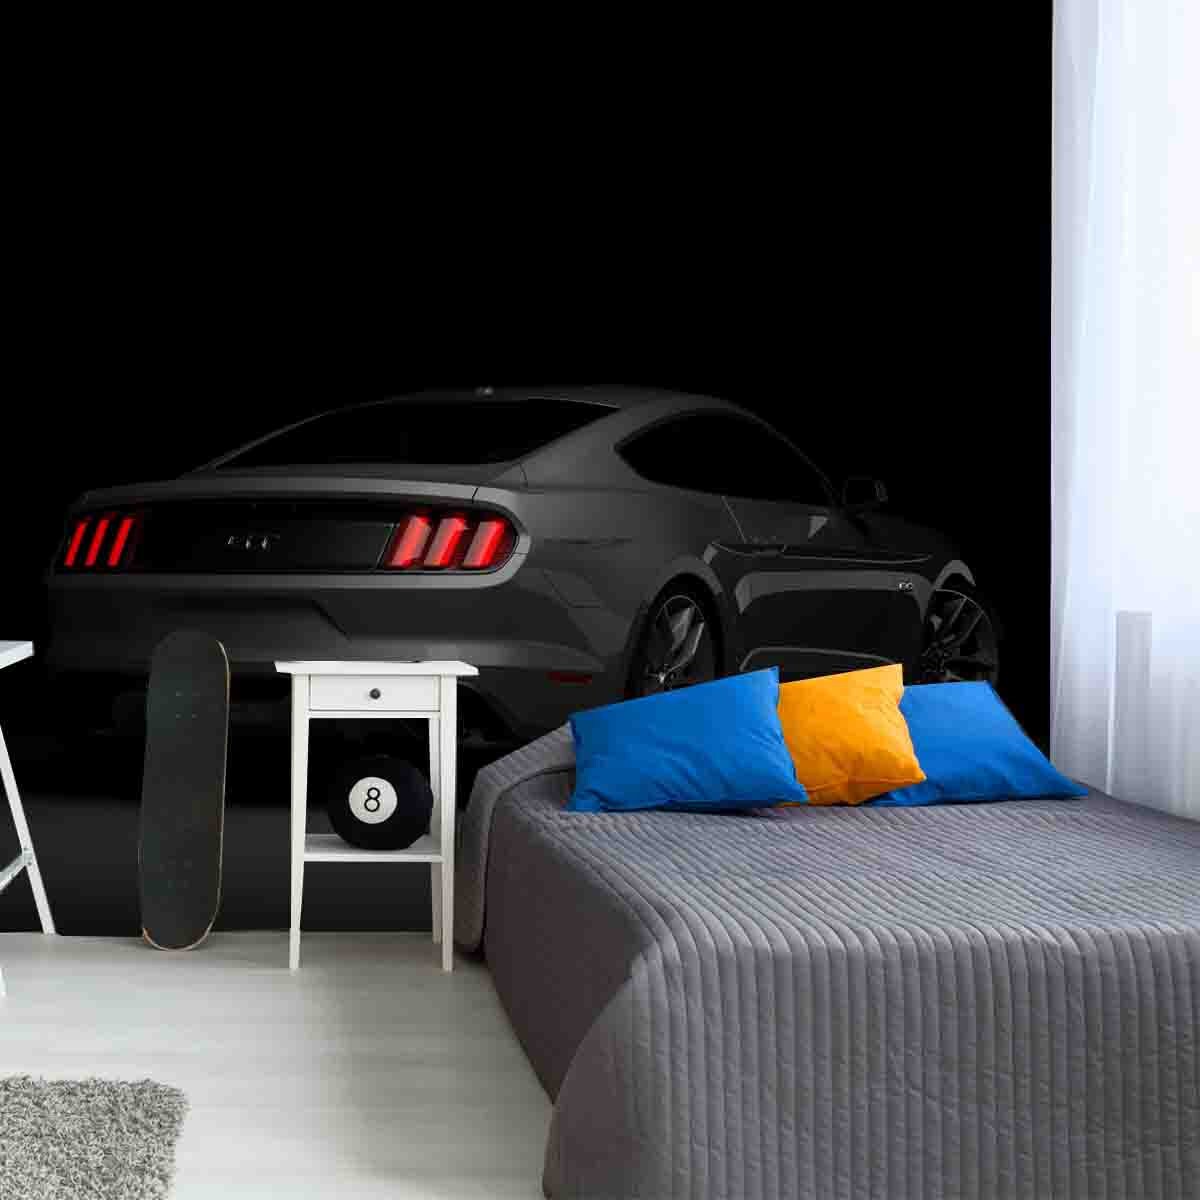 Ford Mustang V8 5.0L. Luxury Stylish Grey Car on Black Background Wallpaper Teen Bedroom Mural